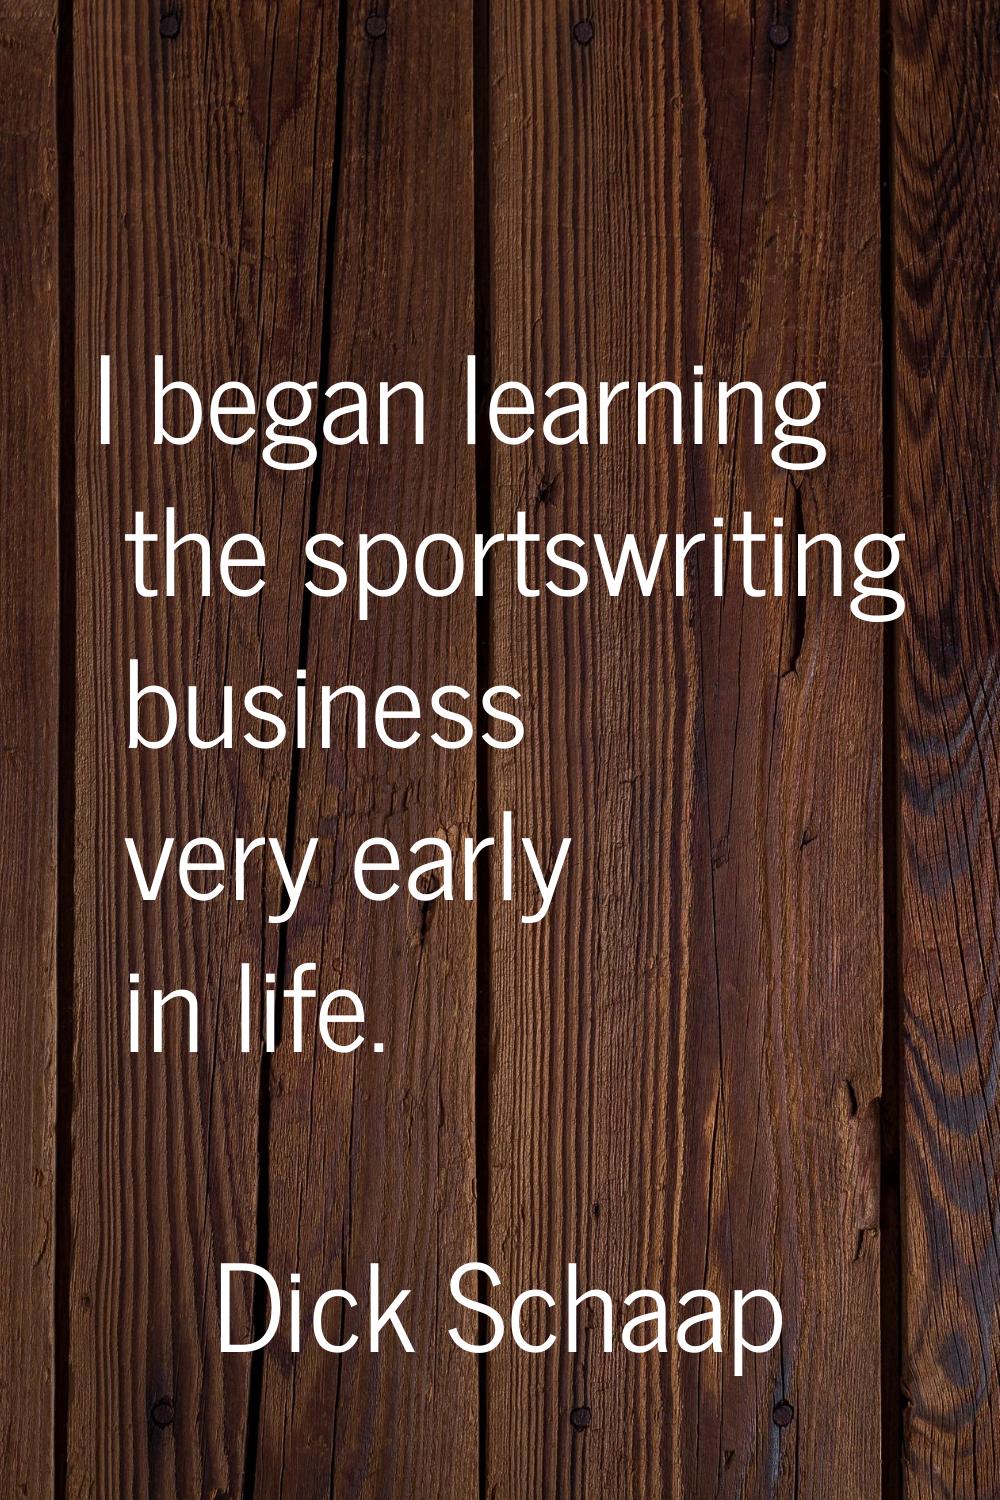 I began learning the sportswriting business very early in life.